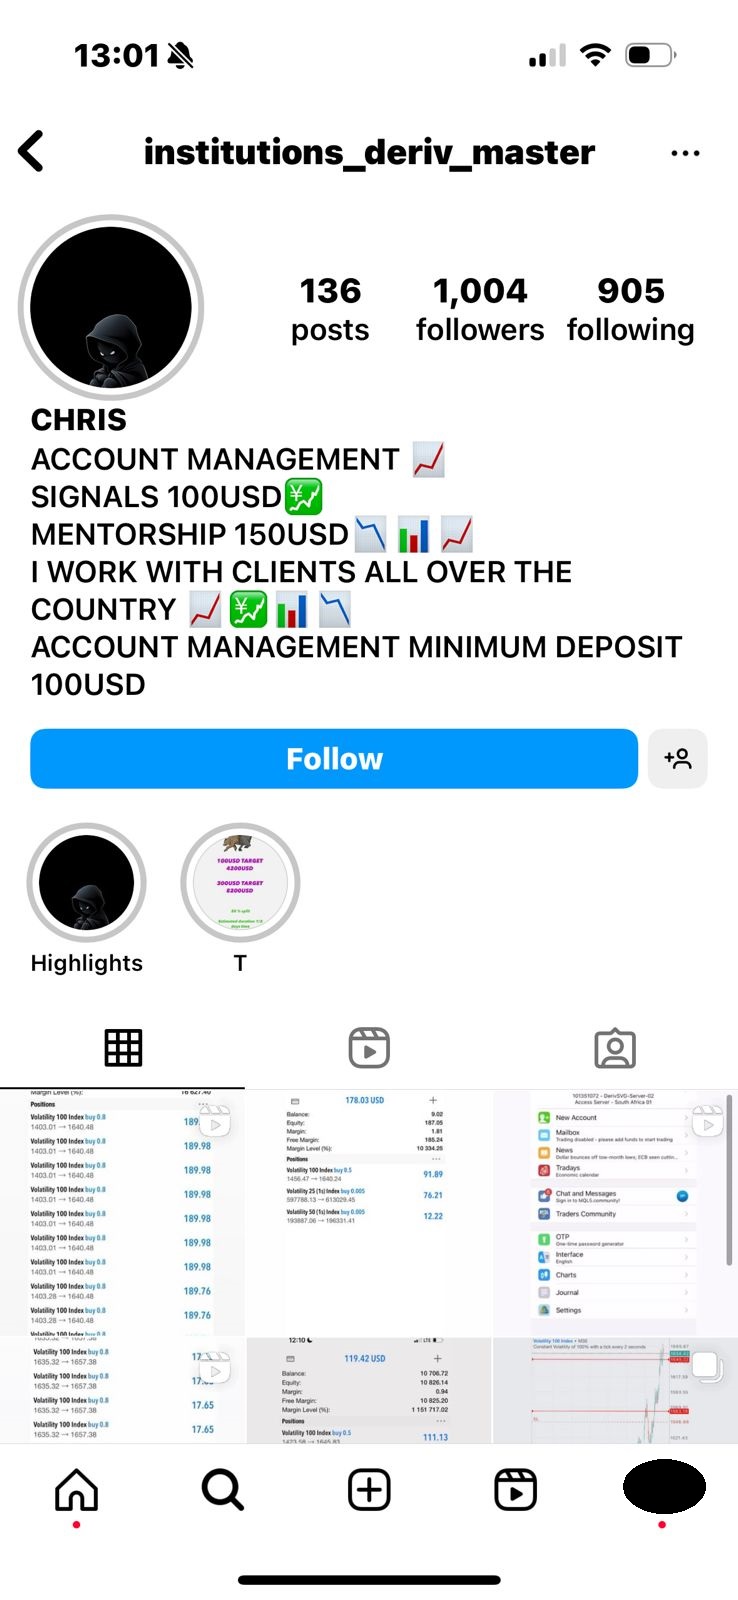 Chris Scam IG PAGE.